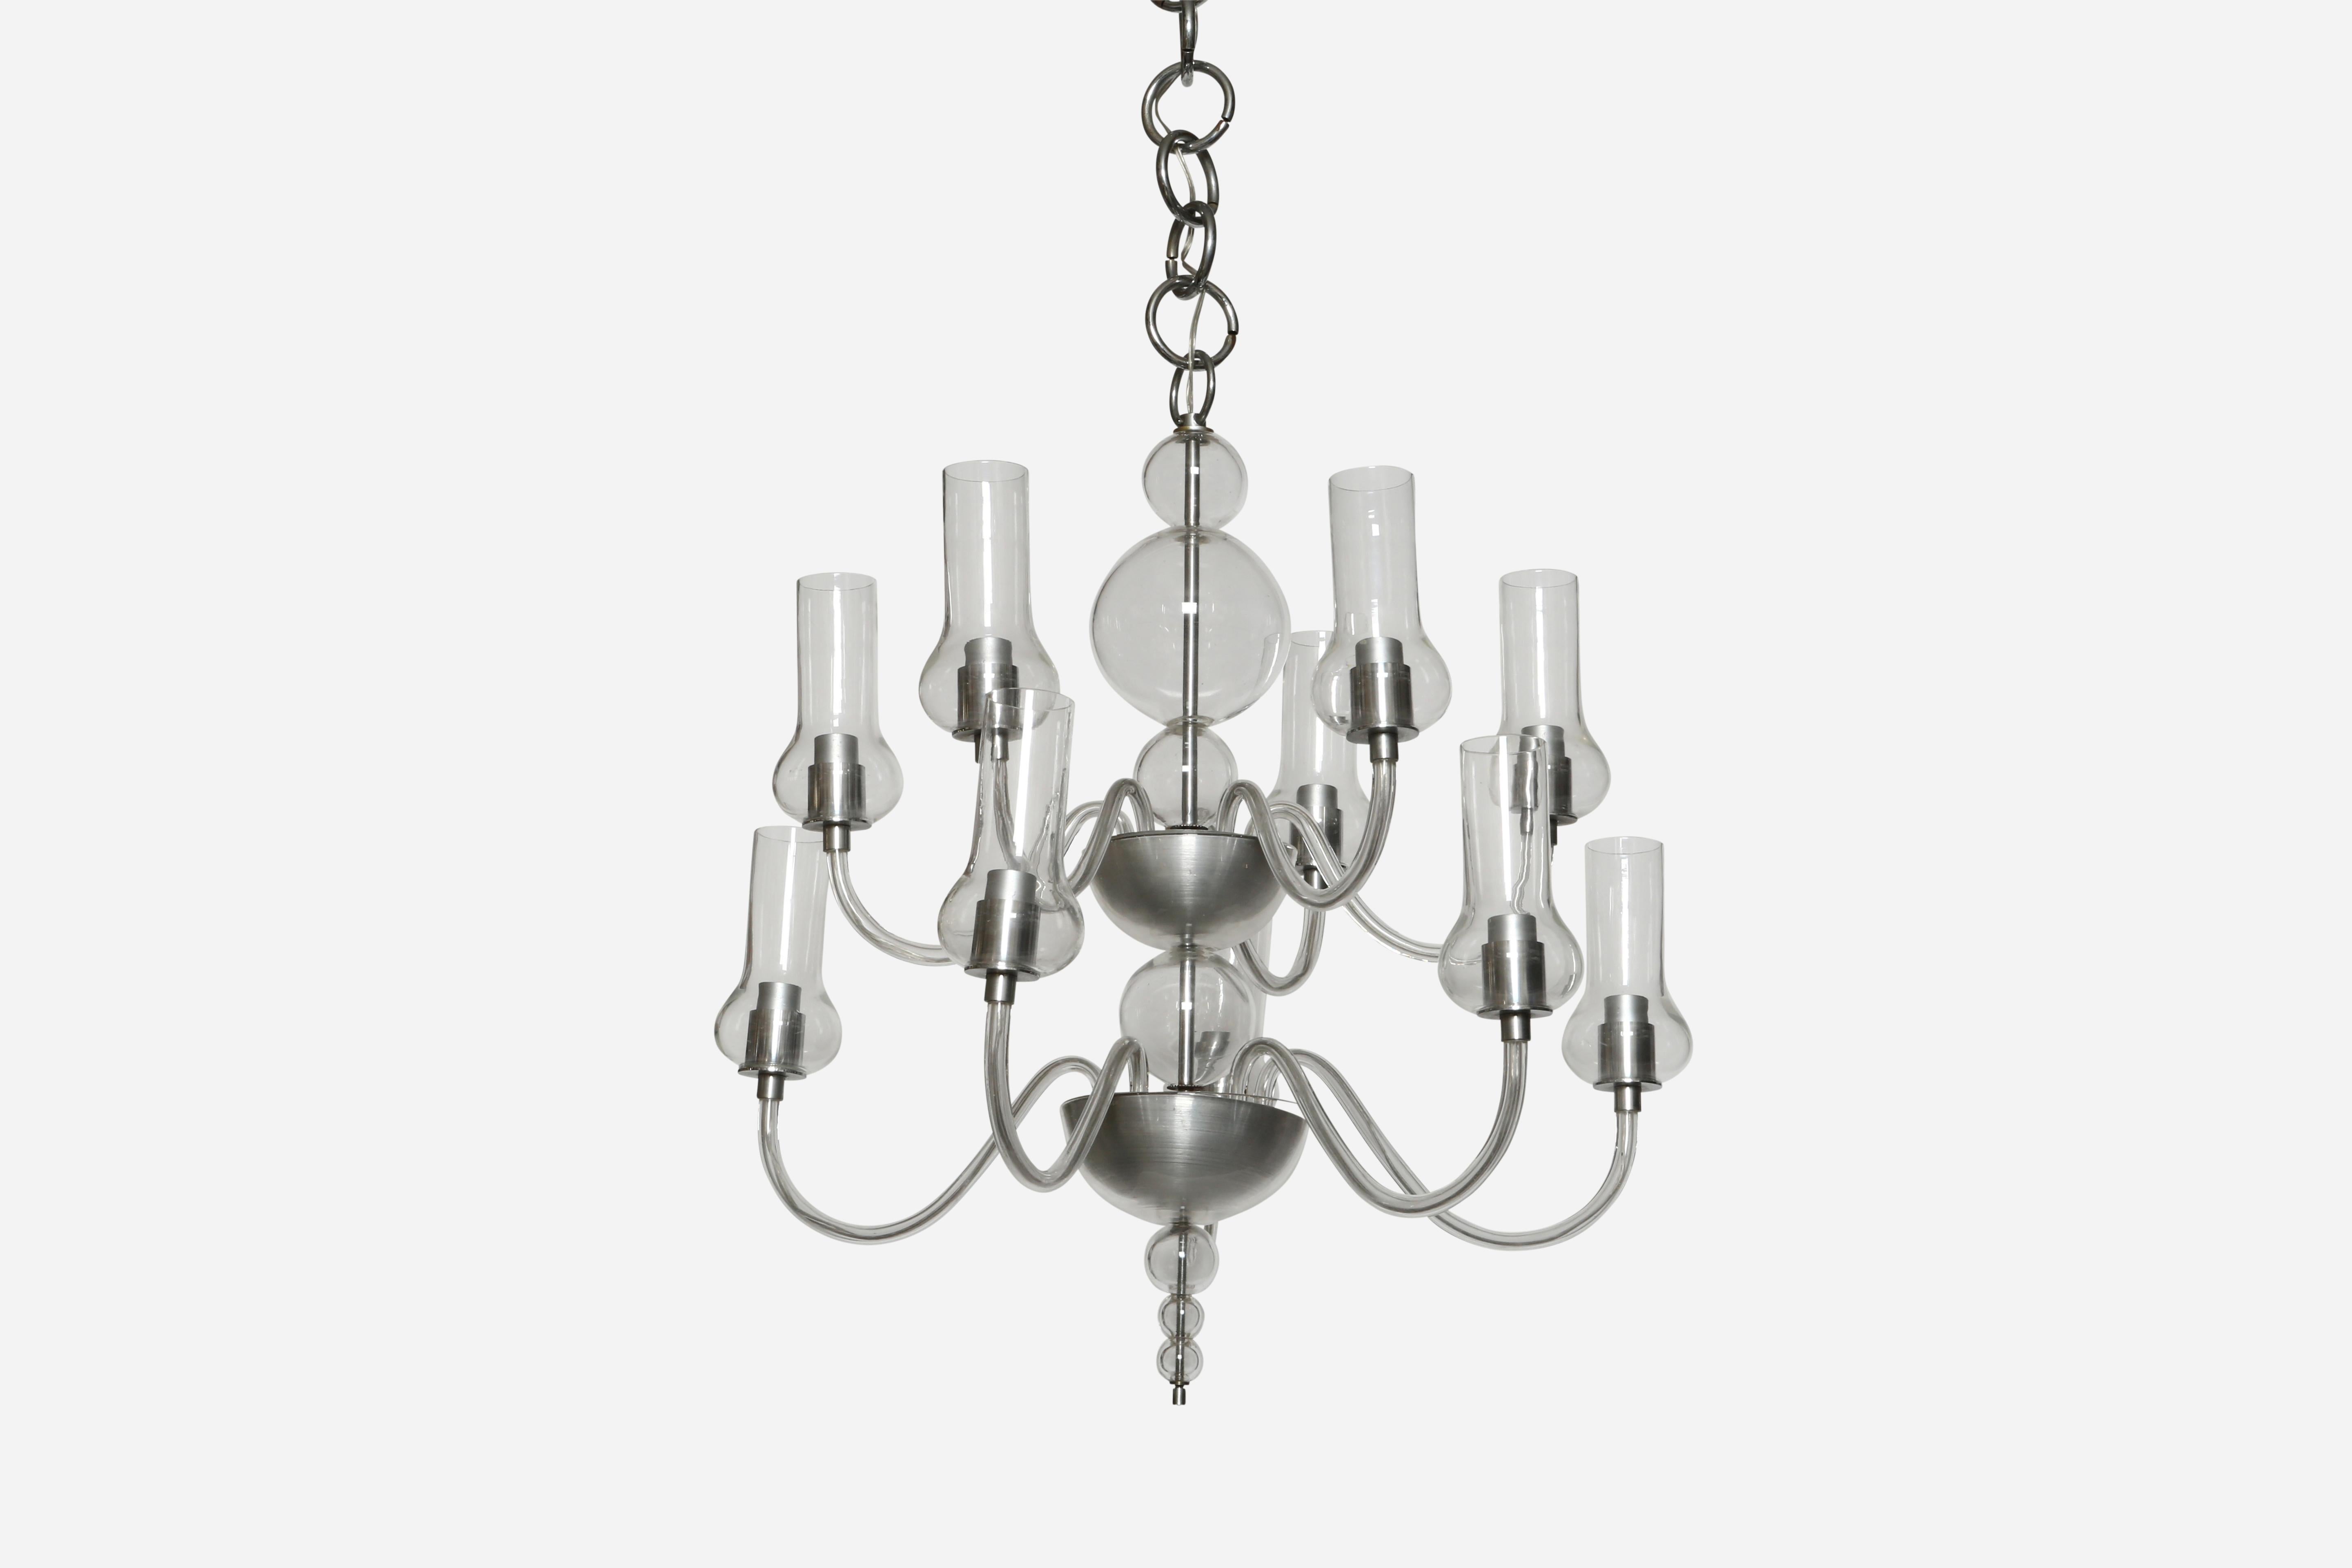 Murano Glass Chandelier by Seguso Vetri d'Arte In Good Condition For Sale In Brooklyn, NY